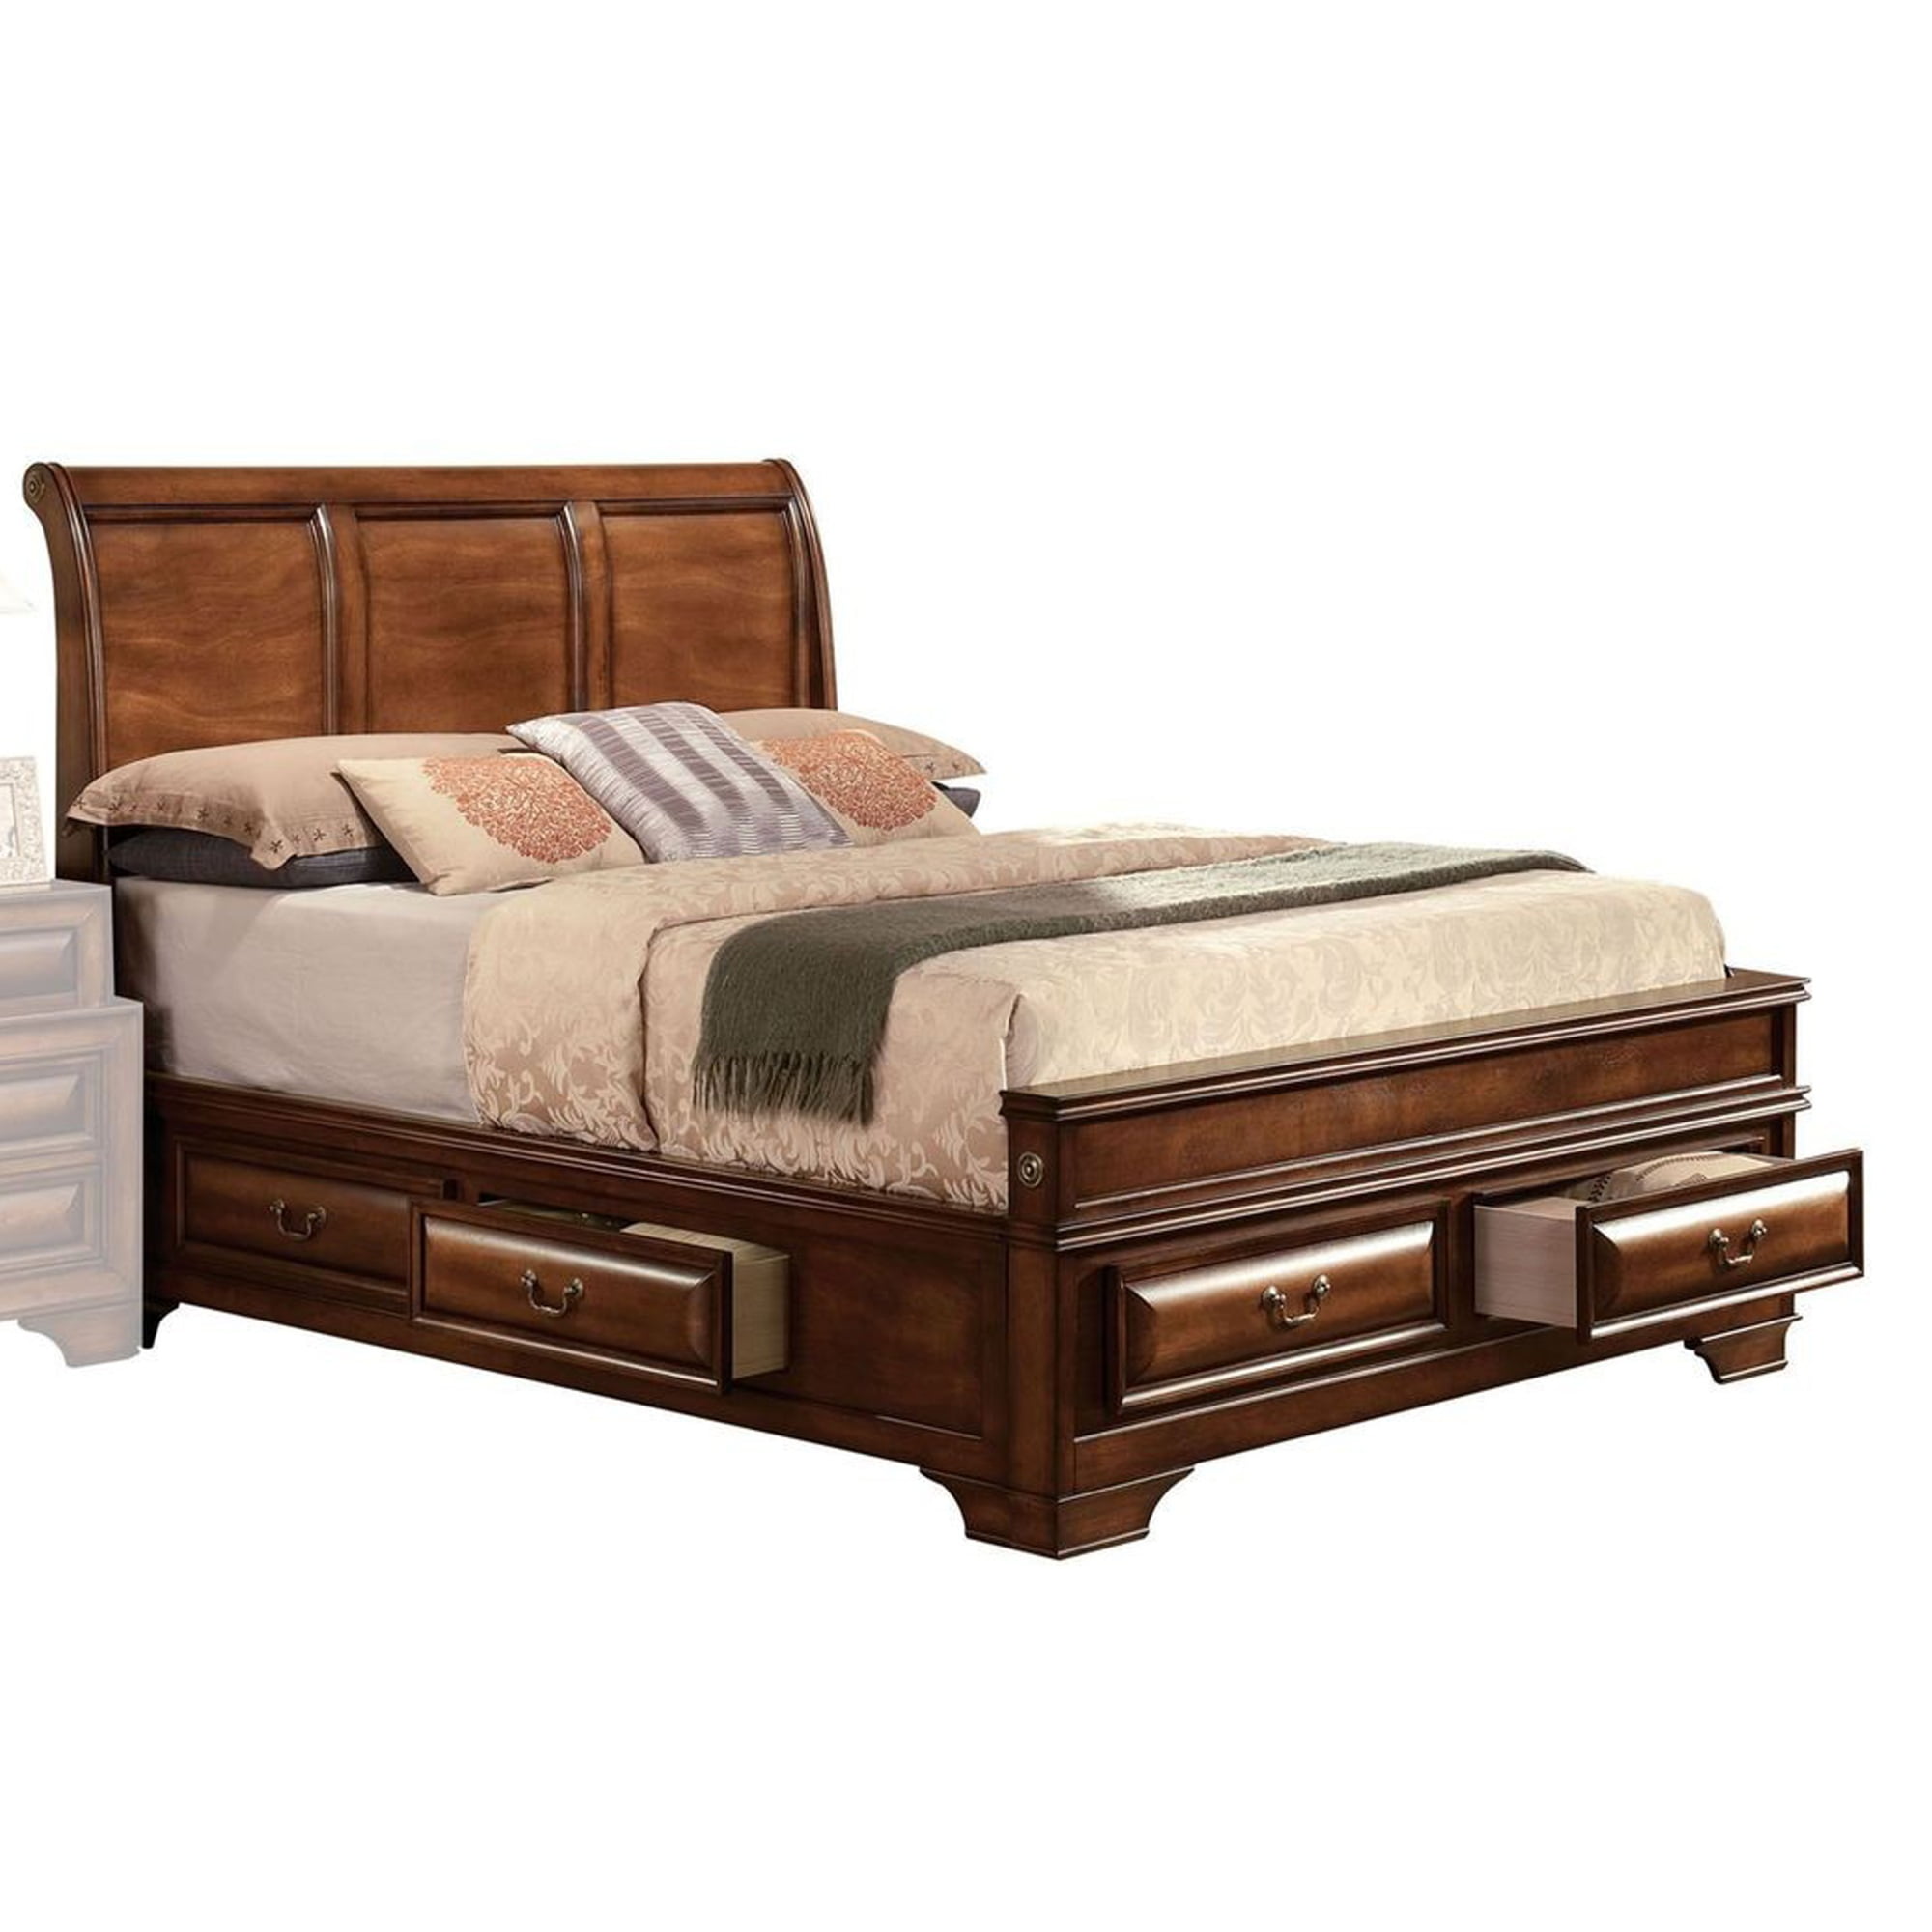 Traditional Style Queen Size Wooden Storage Bed with Six Drawers